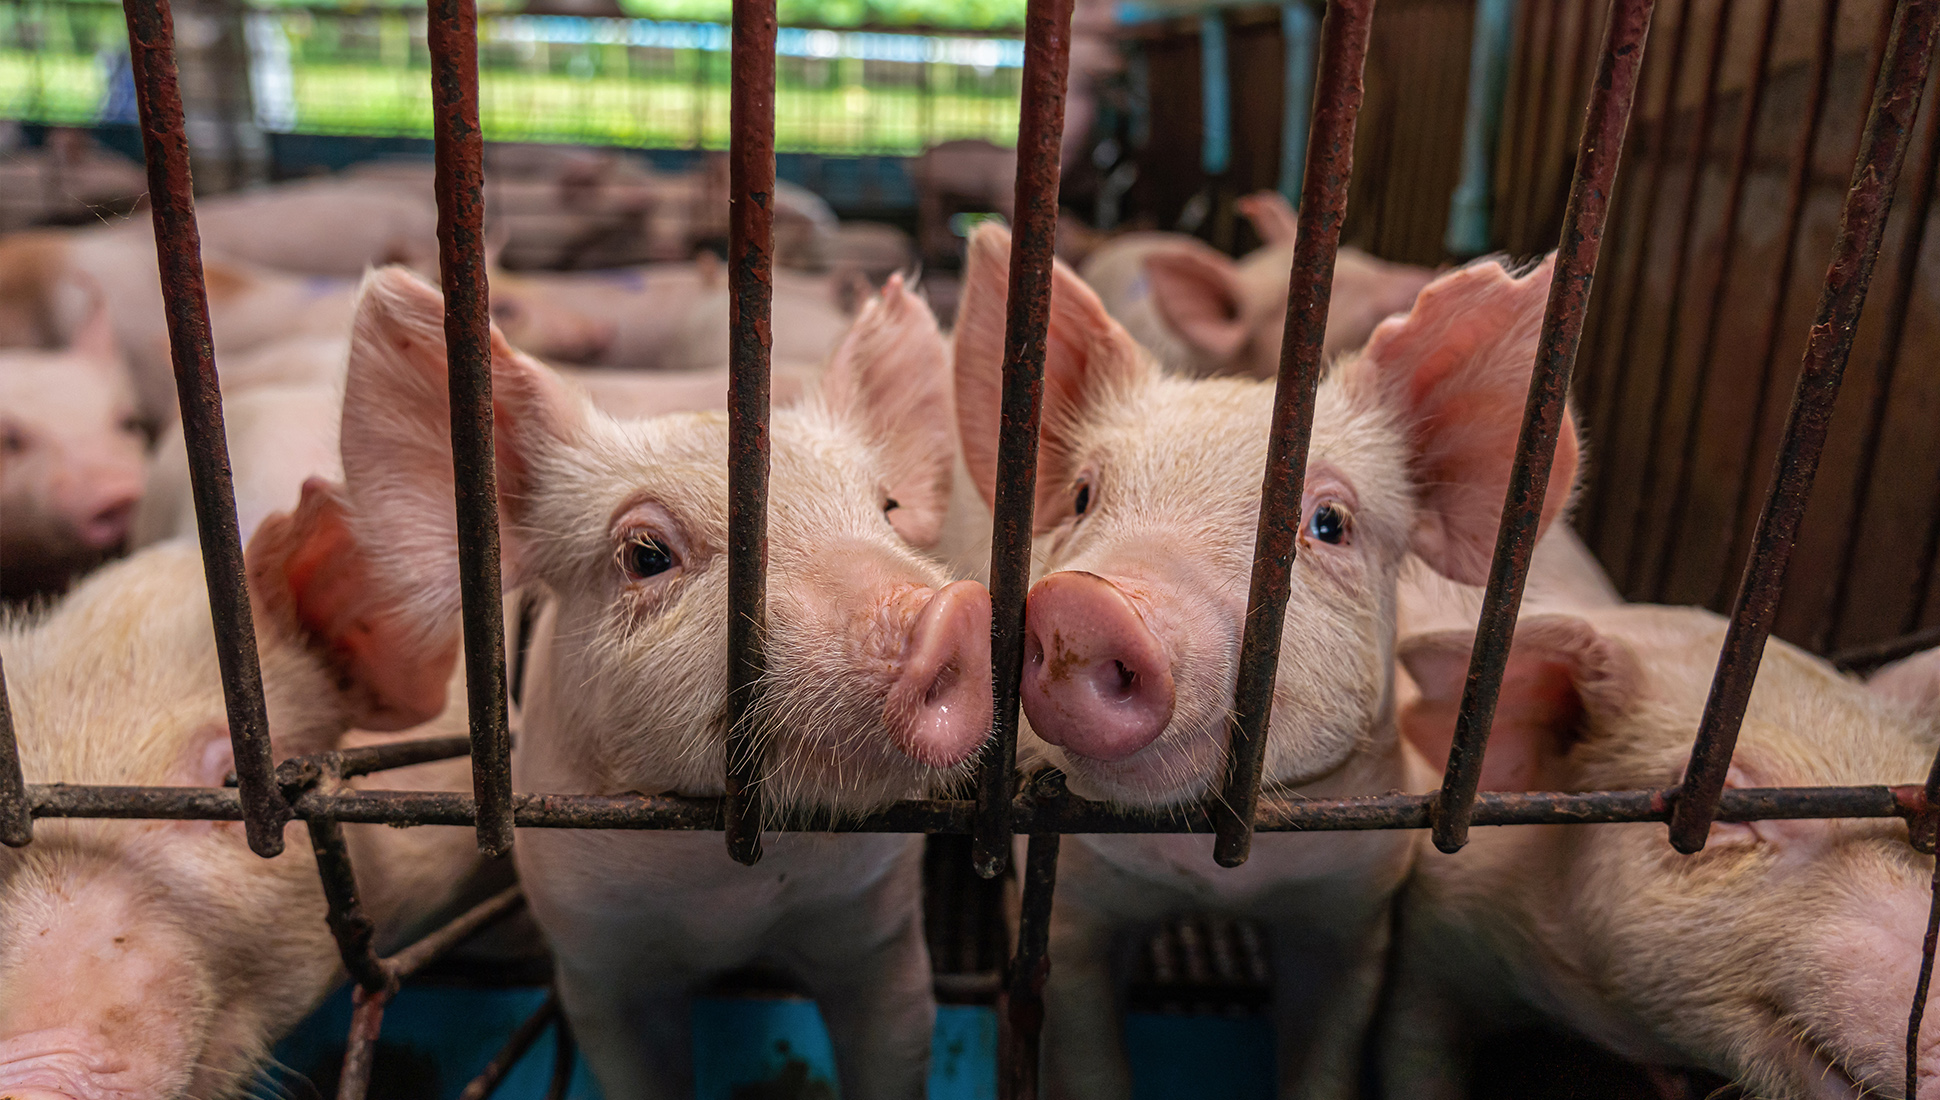 A pig farm was illegally allocated land in East Kazakhstan Region